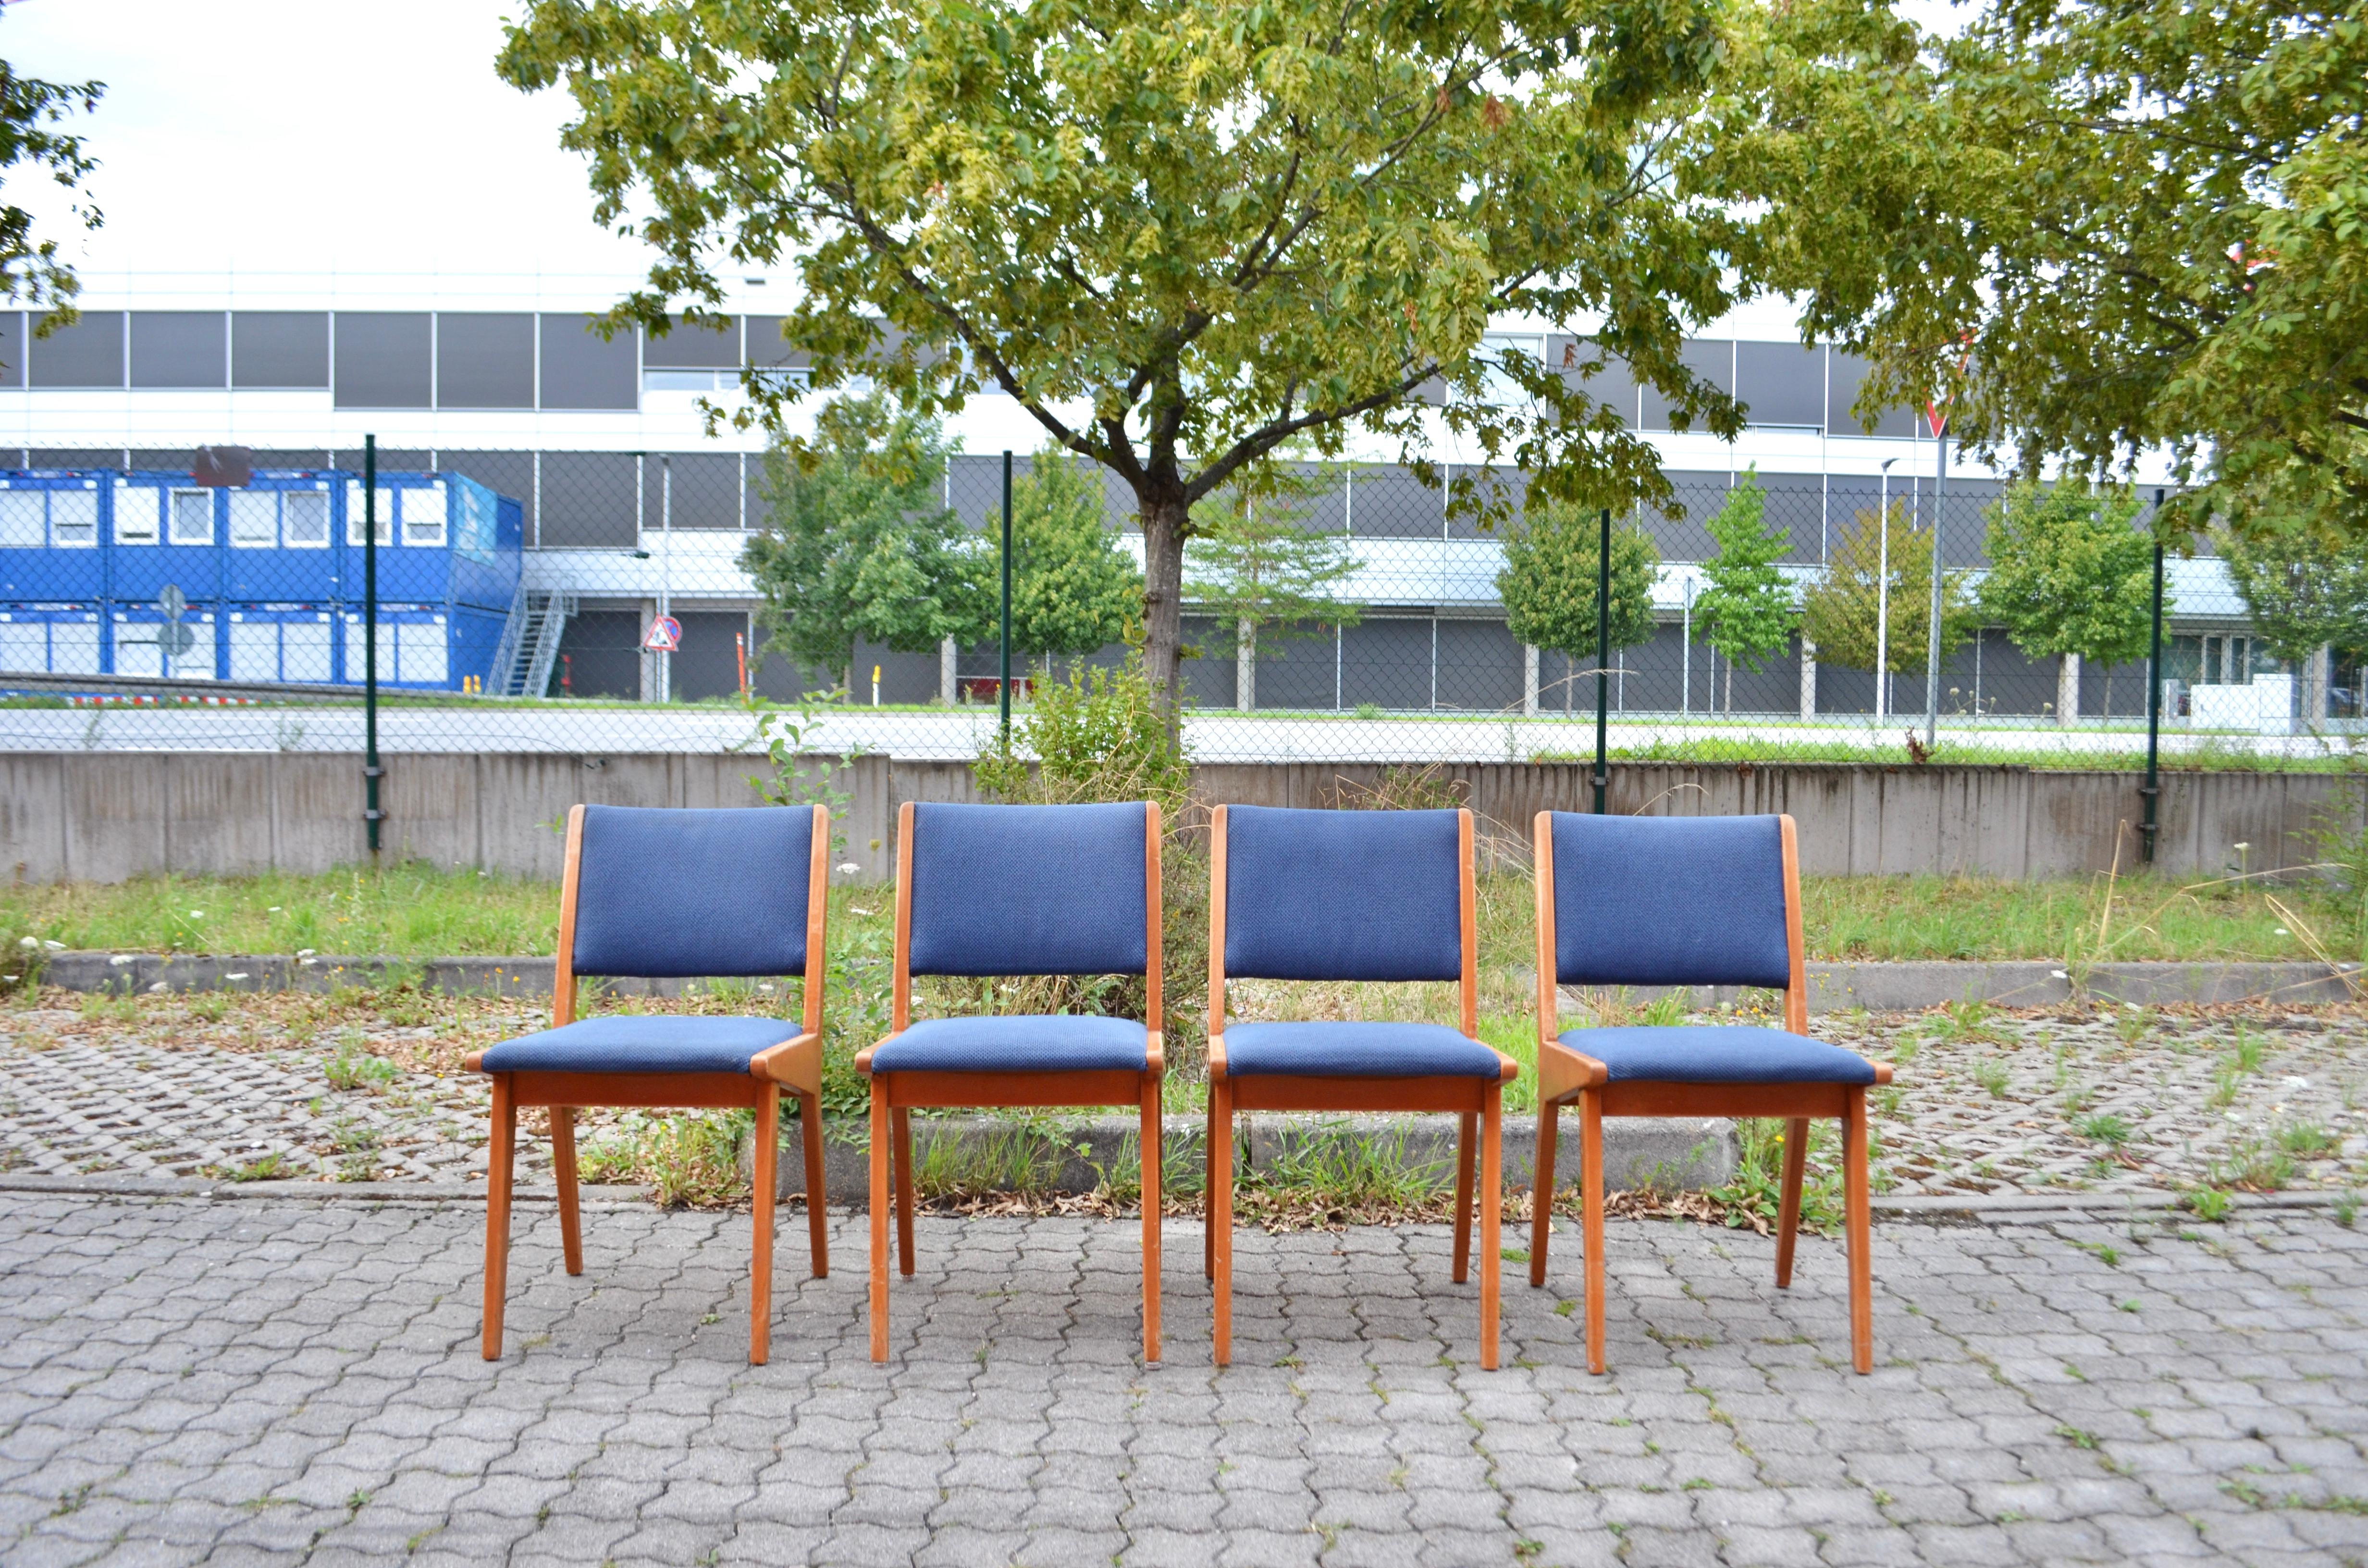 Jens Risom Model 666 Dining chair. Beechwood and blue wool fabric.
Mid Century Dining chairs.
This early condition is made from the 50ties.
Beautiful patina on the wood.
Set of 4